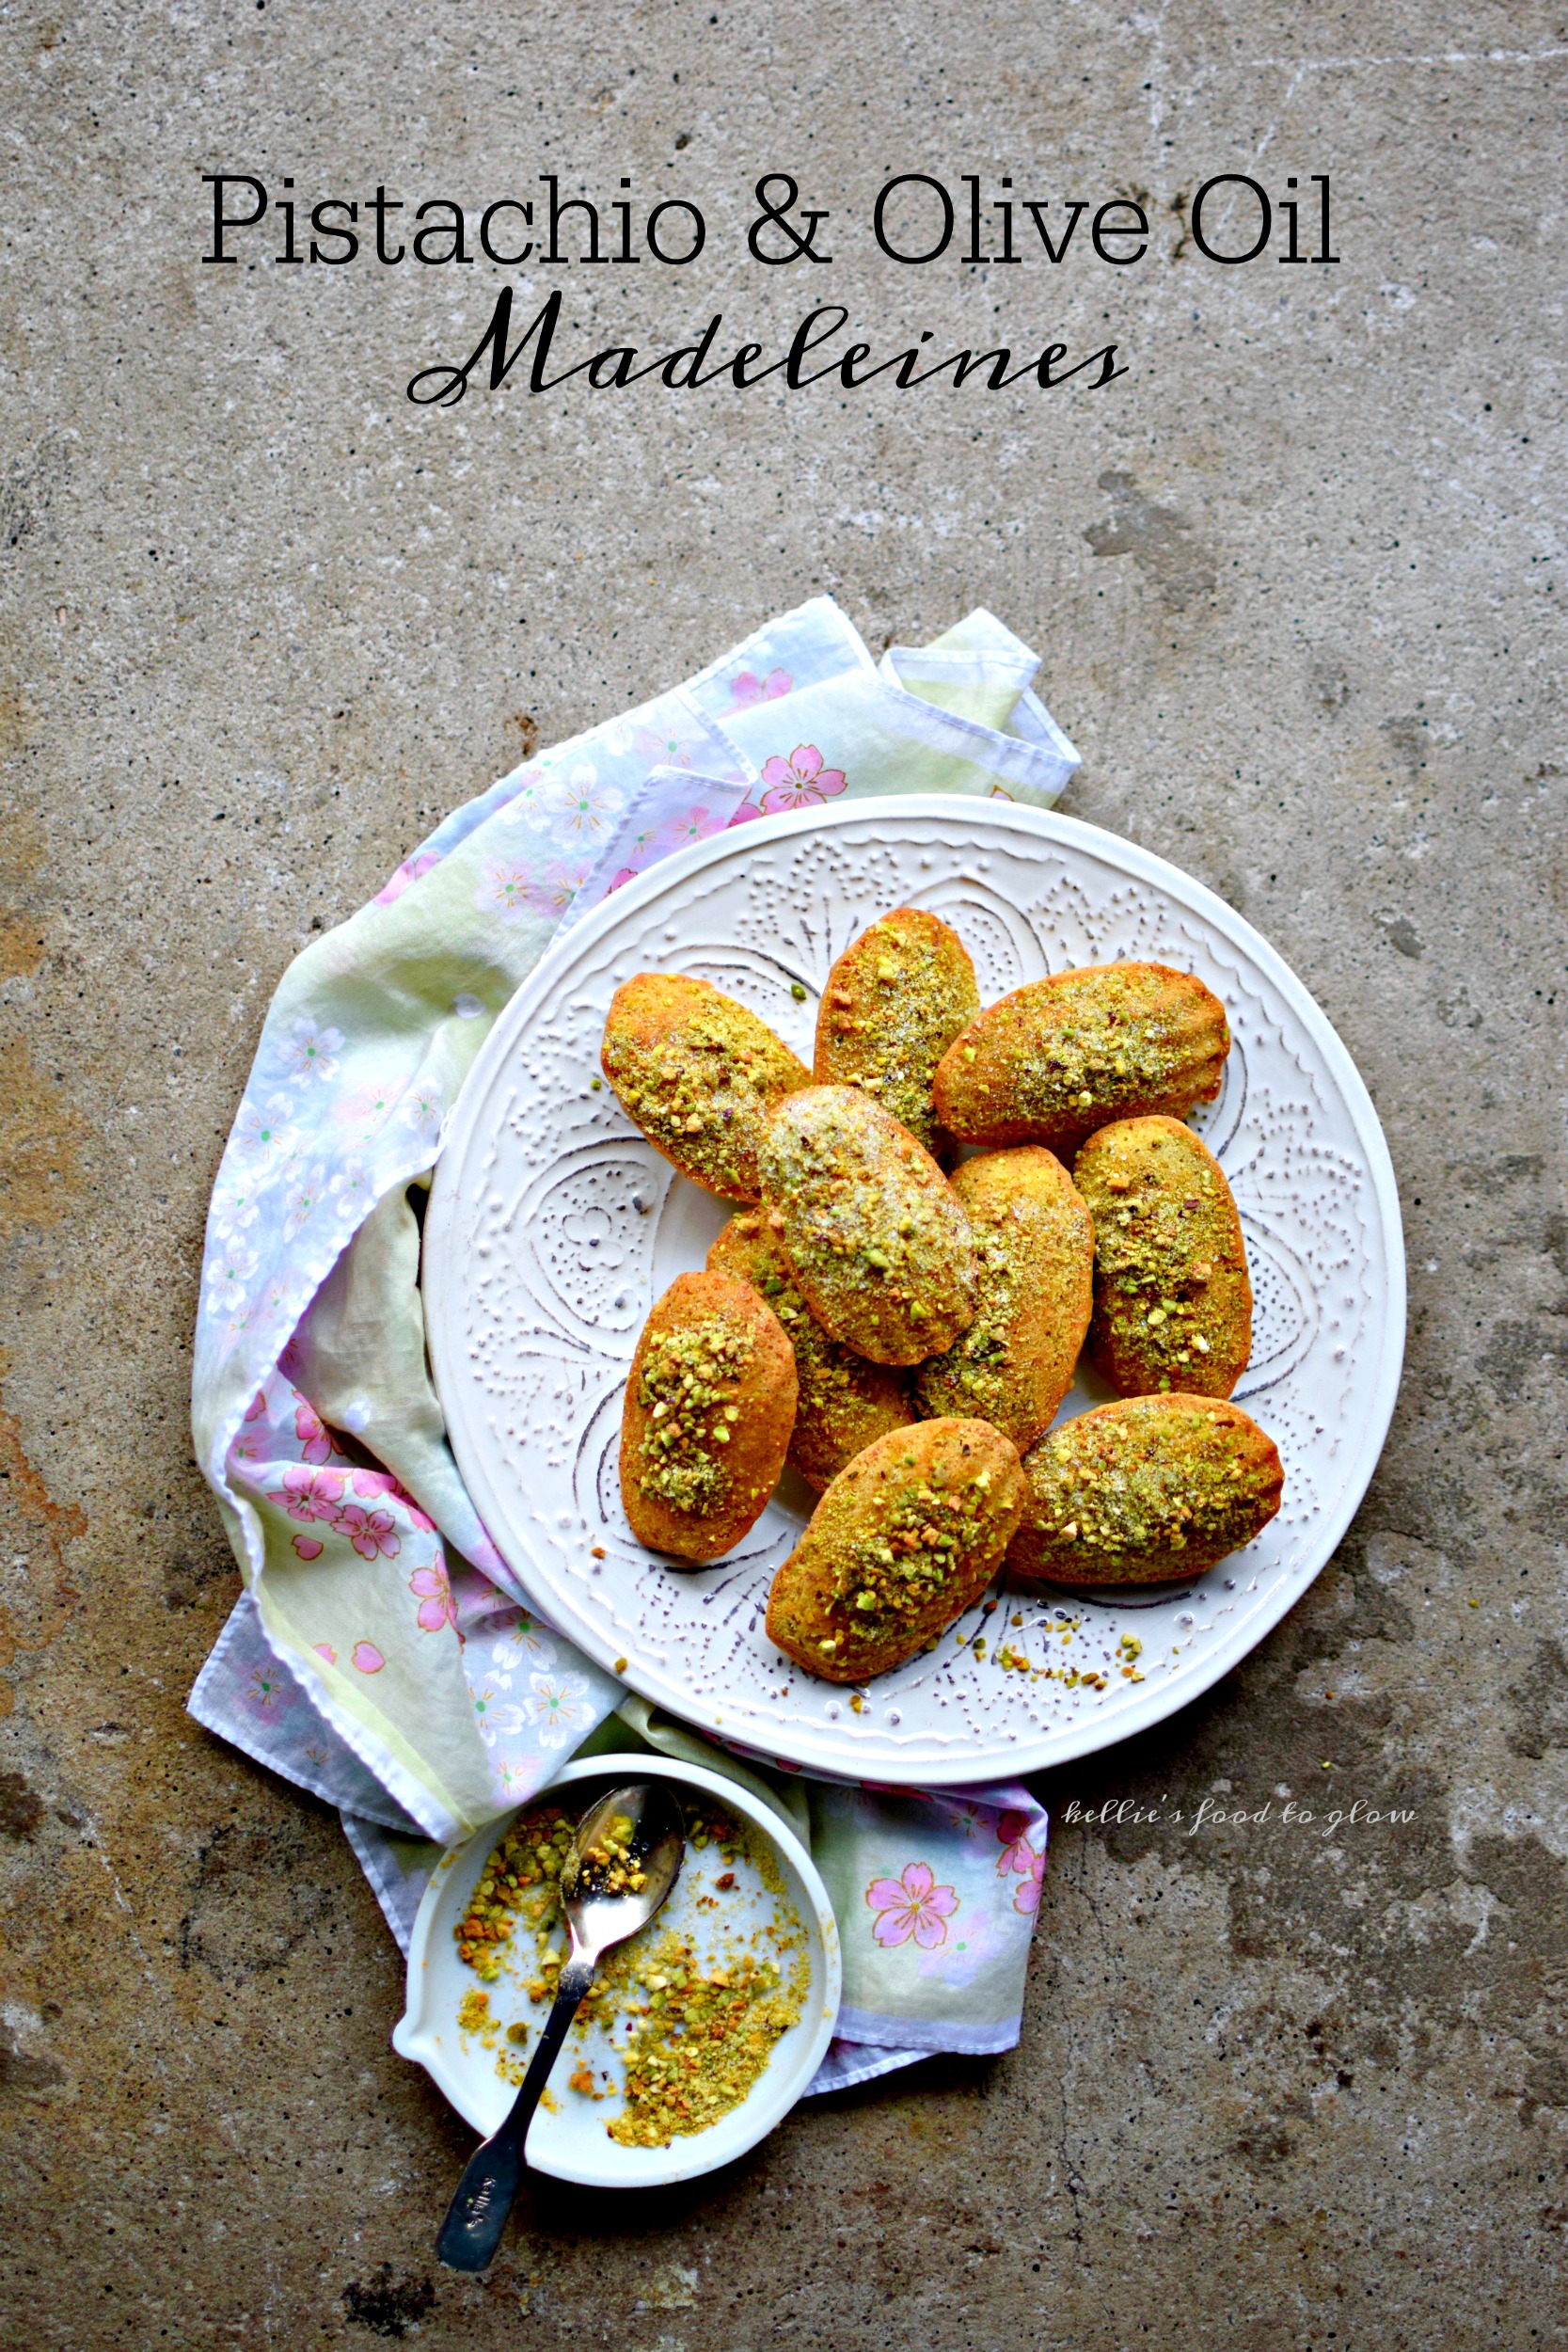 Perhaps one of the most literary of foodstuffs, madeleines are surprisingly easy to make. These tiny scallop-shaped cakes are given a 21st century makeover with olive oil and pistachios - and a touch of yuzu if you have it. Dip into a steaming cup of tea and see what happens!